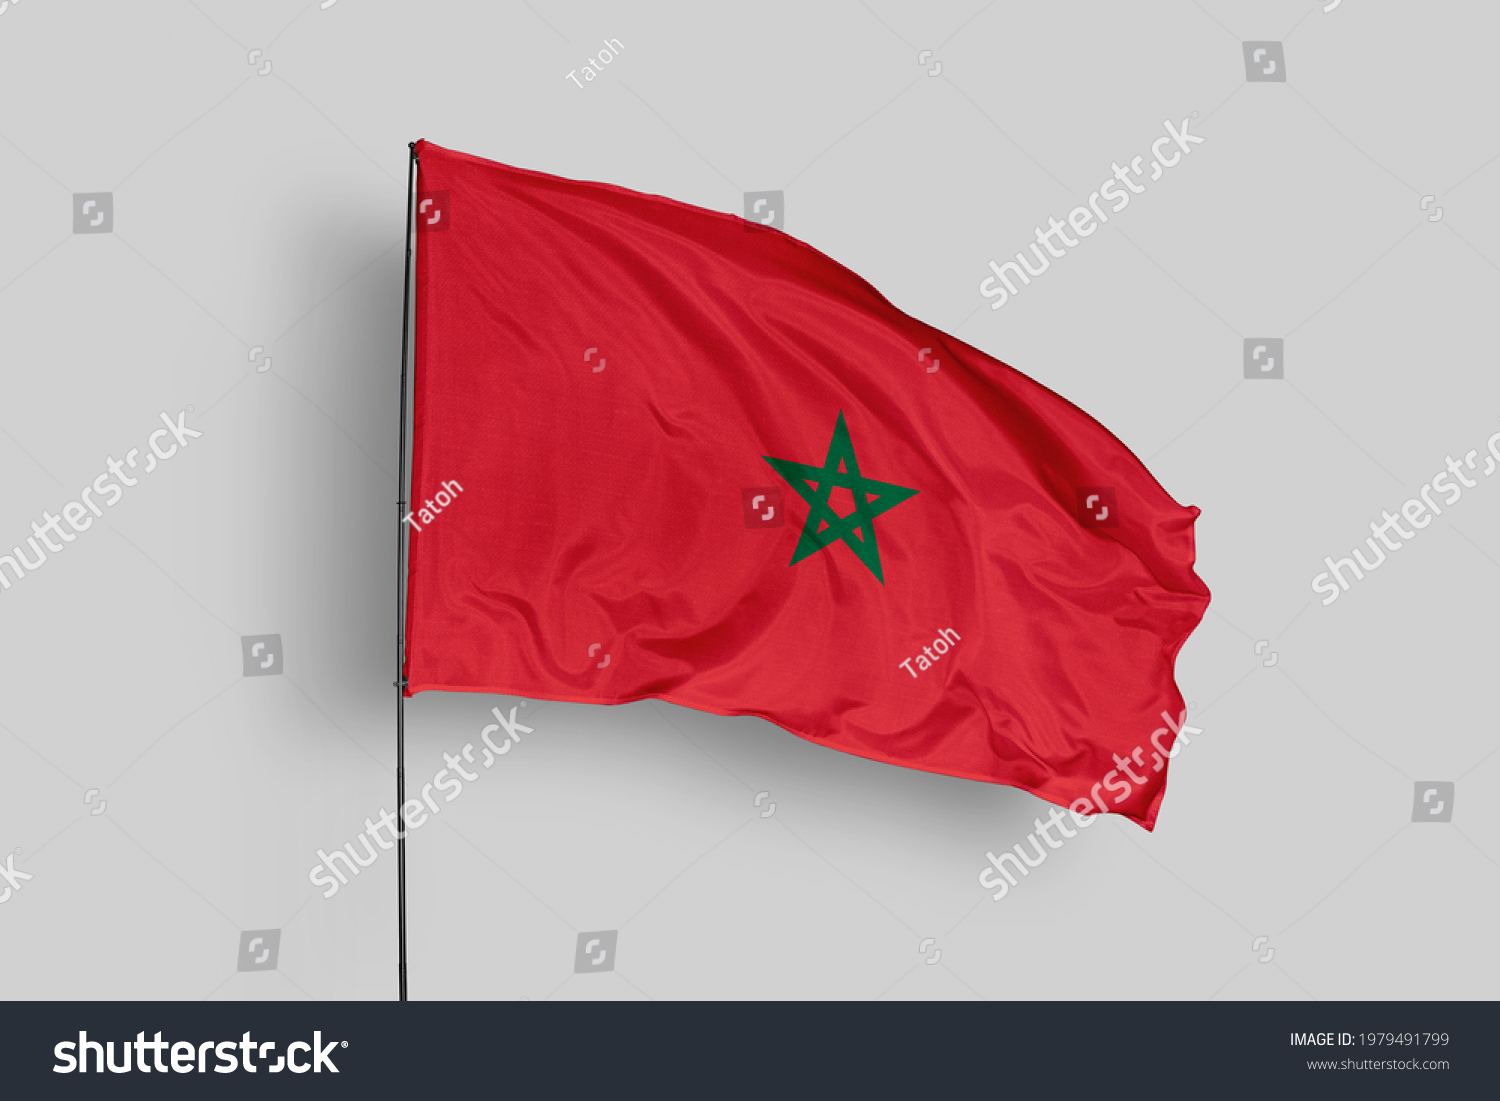 Morocco flag isolated on white background with clipping path. close up waving flag of Morocco. flag symbols of Morocco. Morocco flag frame with empty space for your text. #1979491799